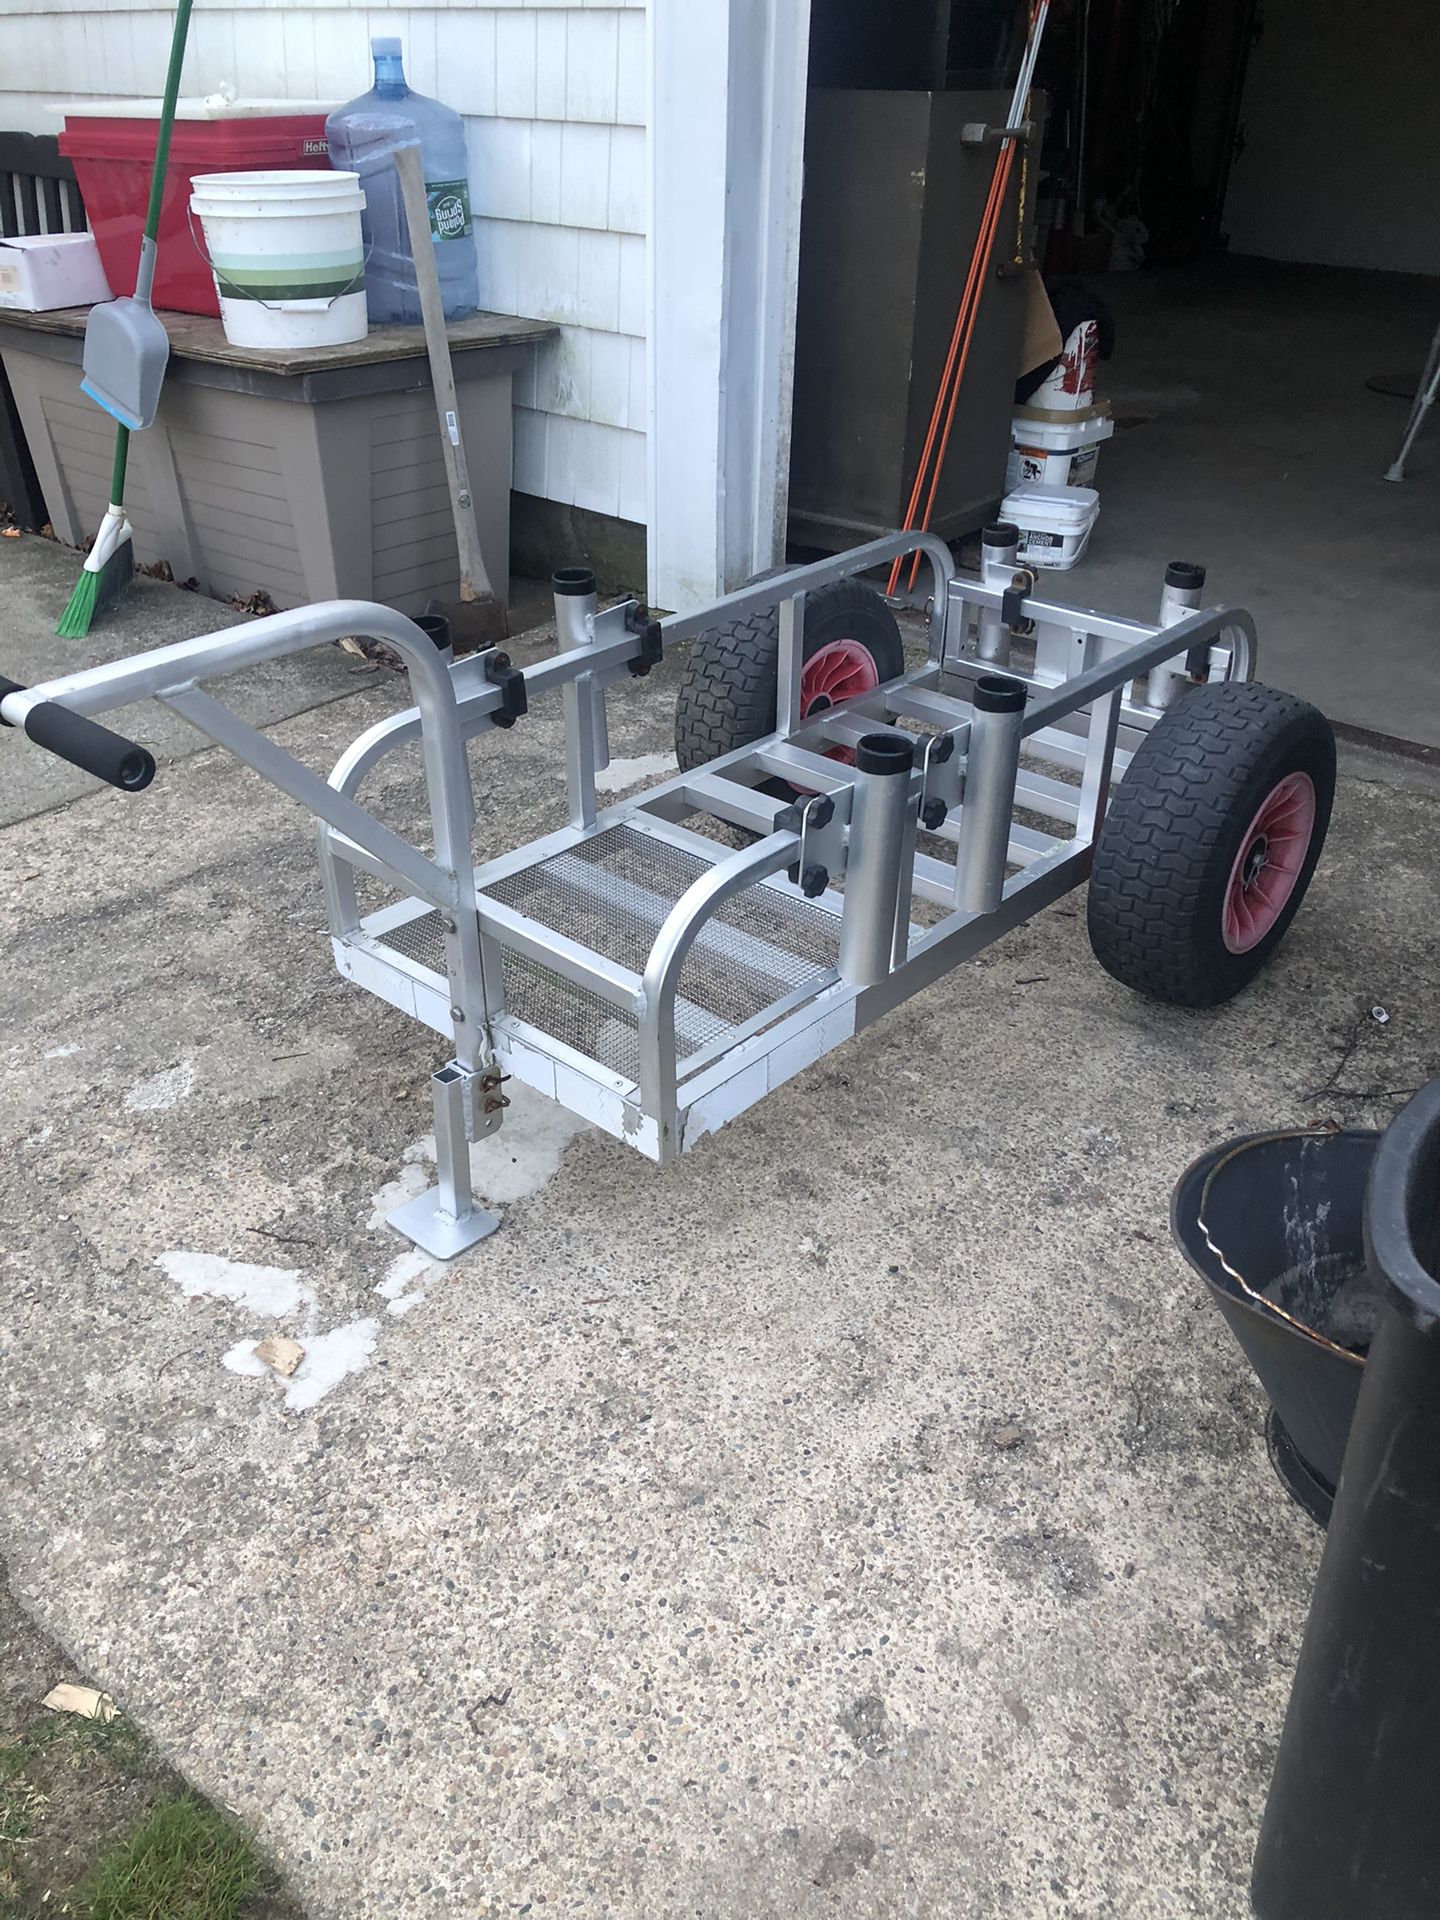 Offshore anglers fishing cart